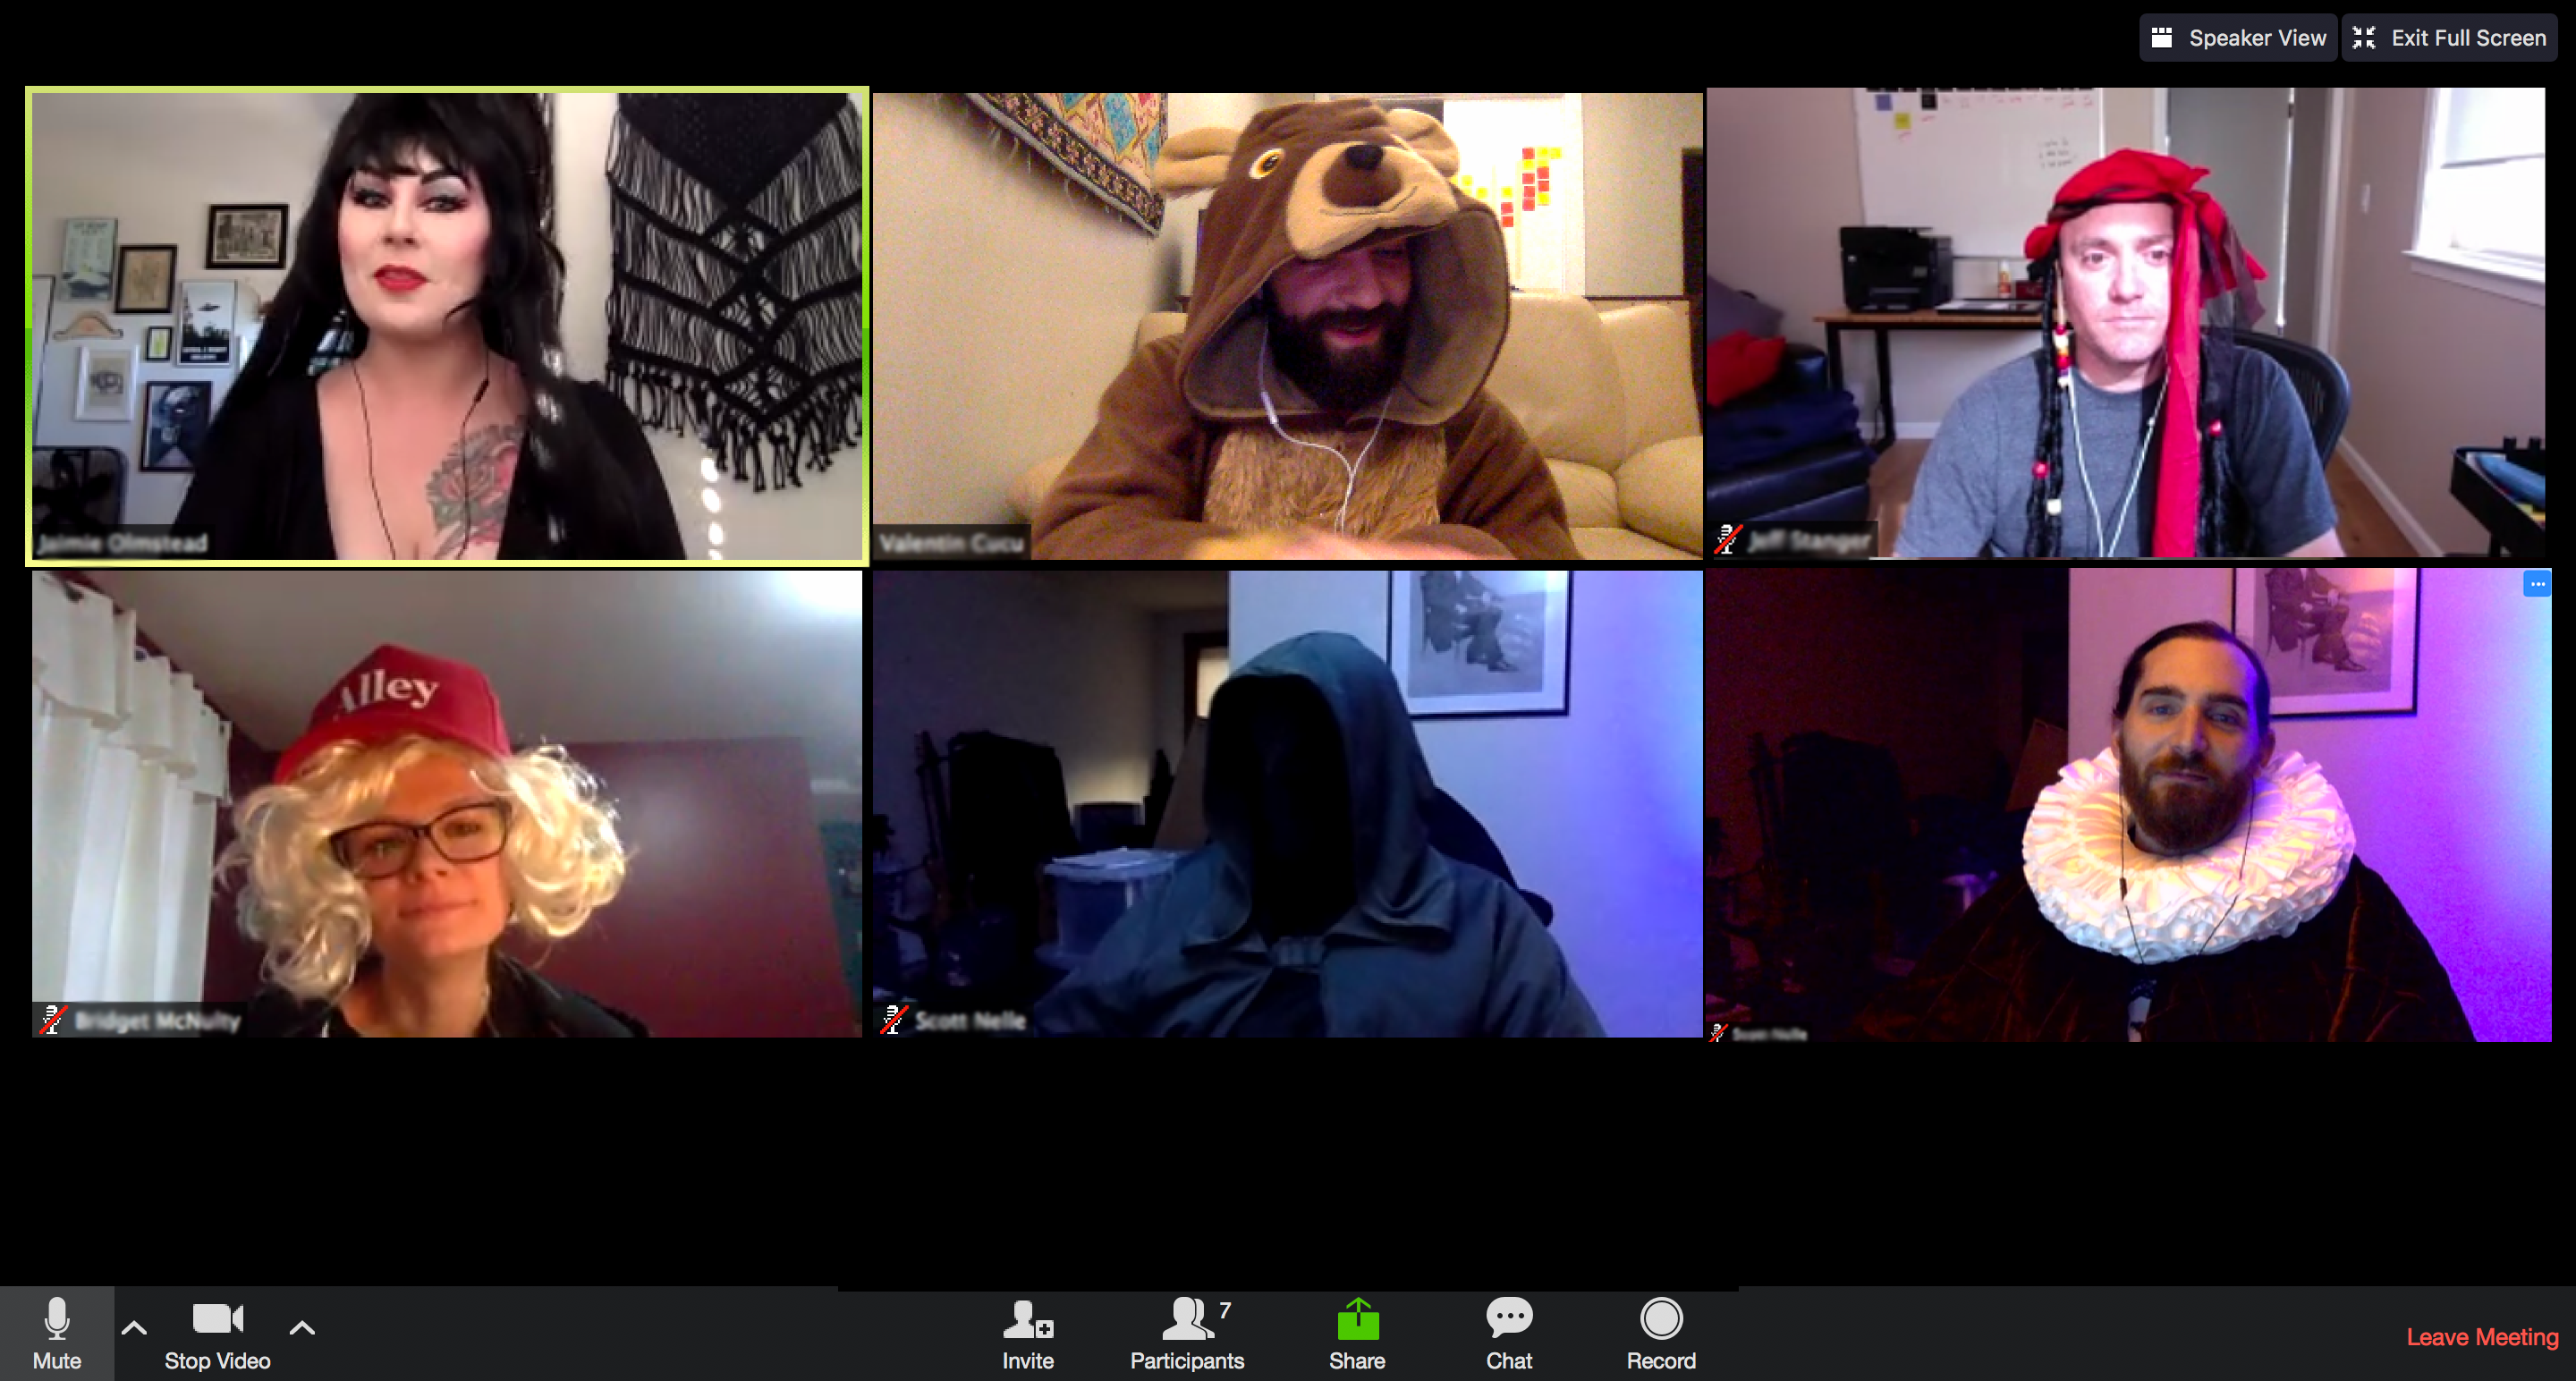 A Zoom call of six Alley team members in costumes - Elvira, a bear hoodie, a strange red hat, a Marilyn Monroe wig, a dark hooded stranger, and an Elizabethan collar